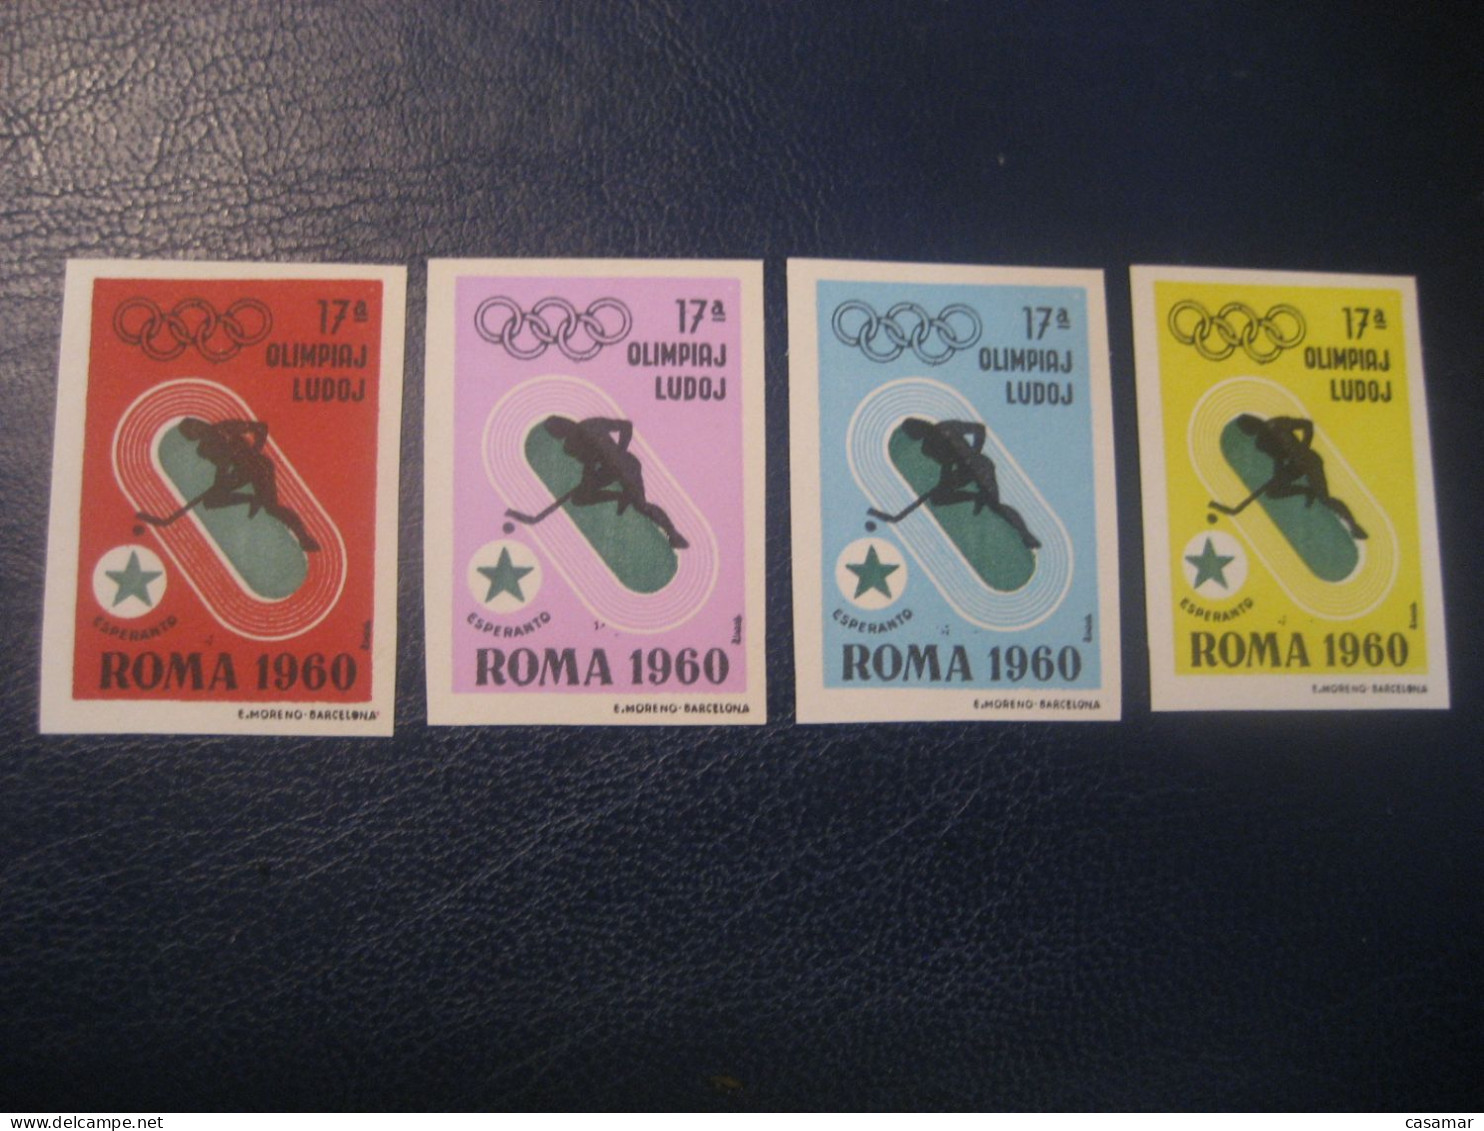 ROMA 1960 Ice Hockey Sur Glace Olympic Games Olympics Esperanto 4 Imperforated Poster Stamp Vignette ITALY Spain Label - Eishockey